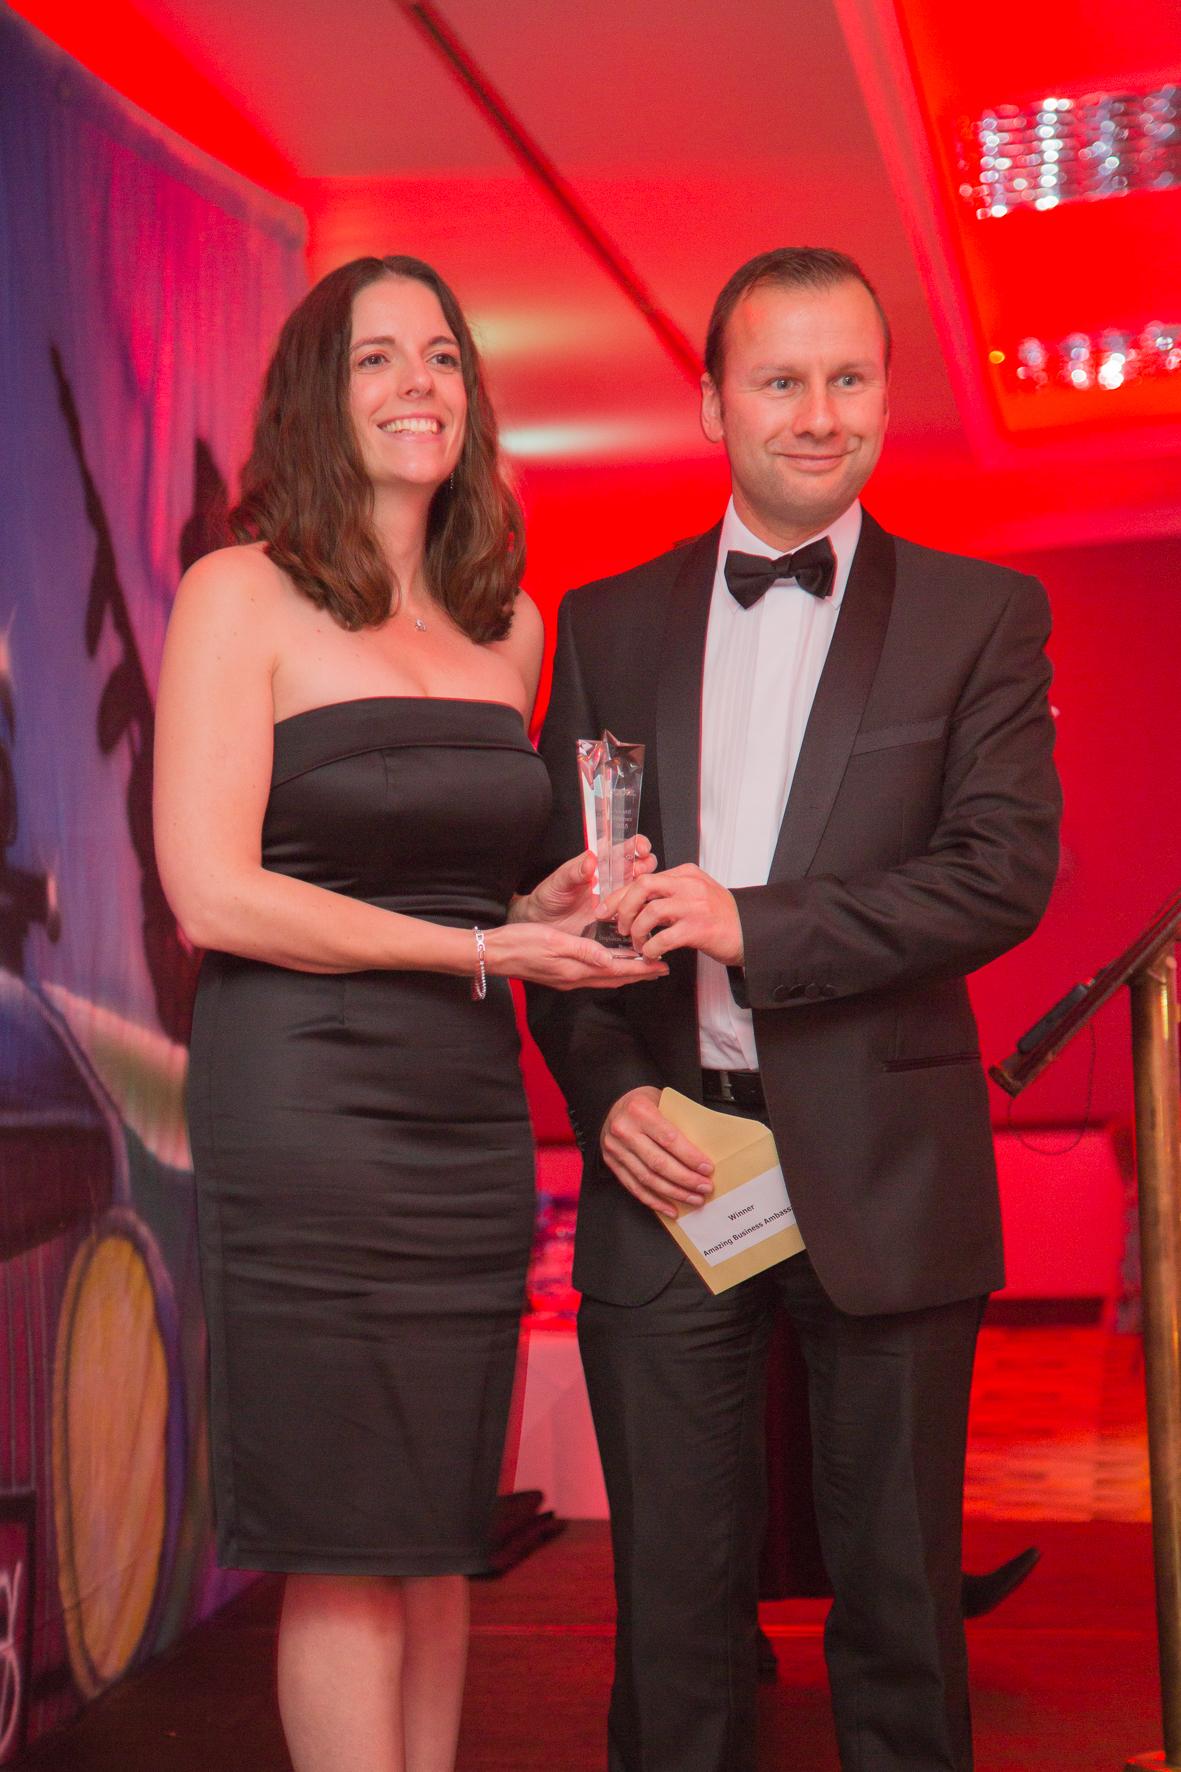 Winner Stephanie Bellchambers from Biscoes with Sponsor Michael Burden from HSBC